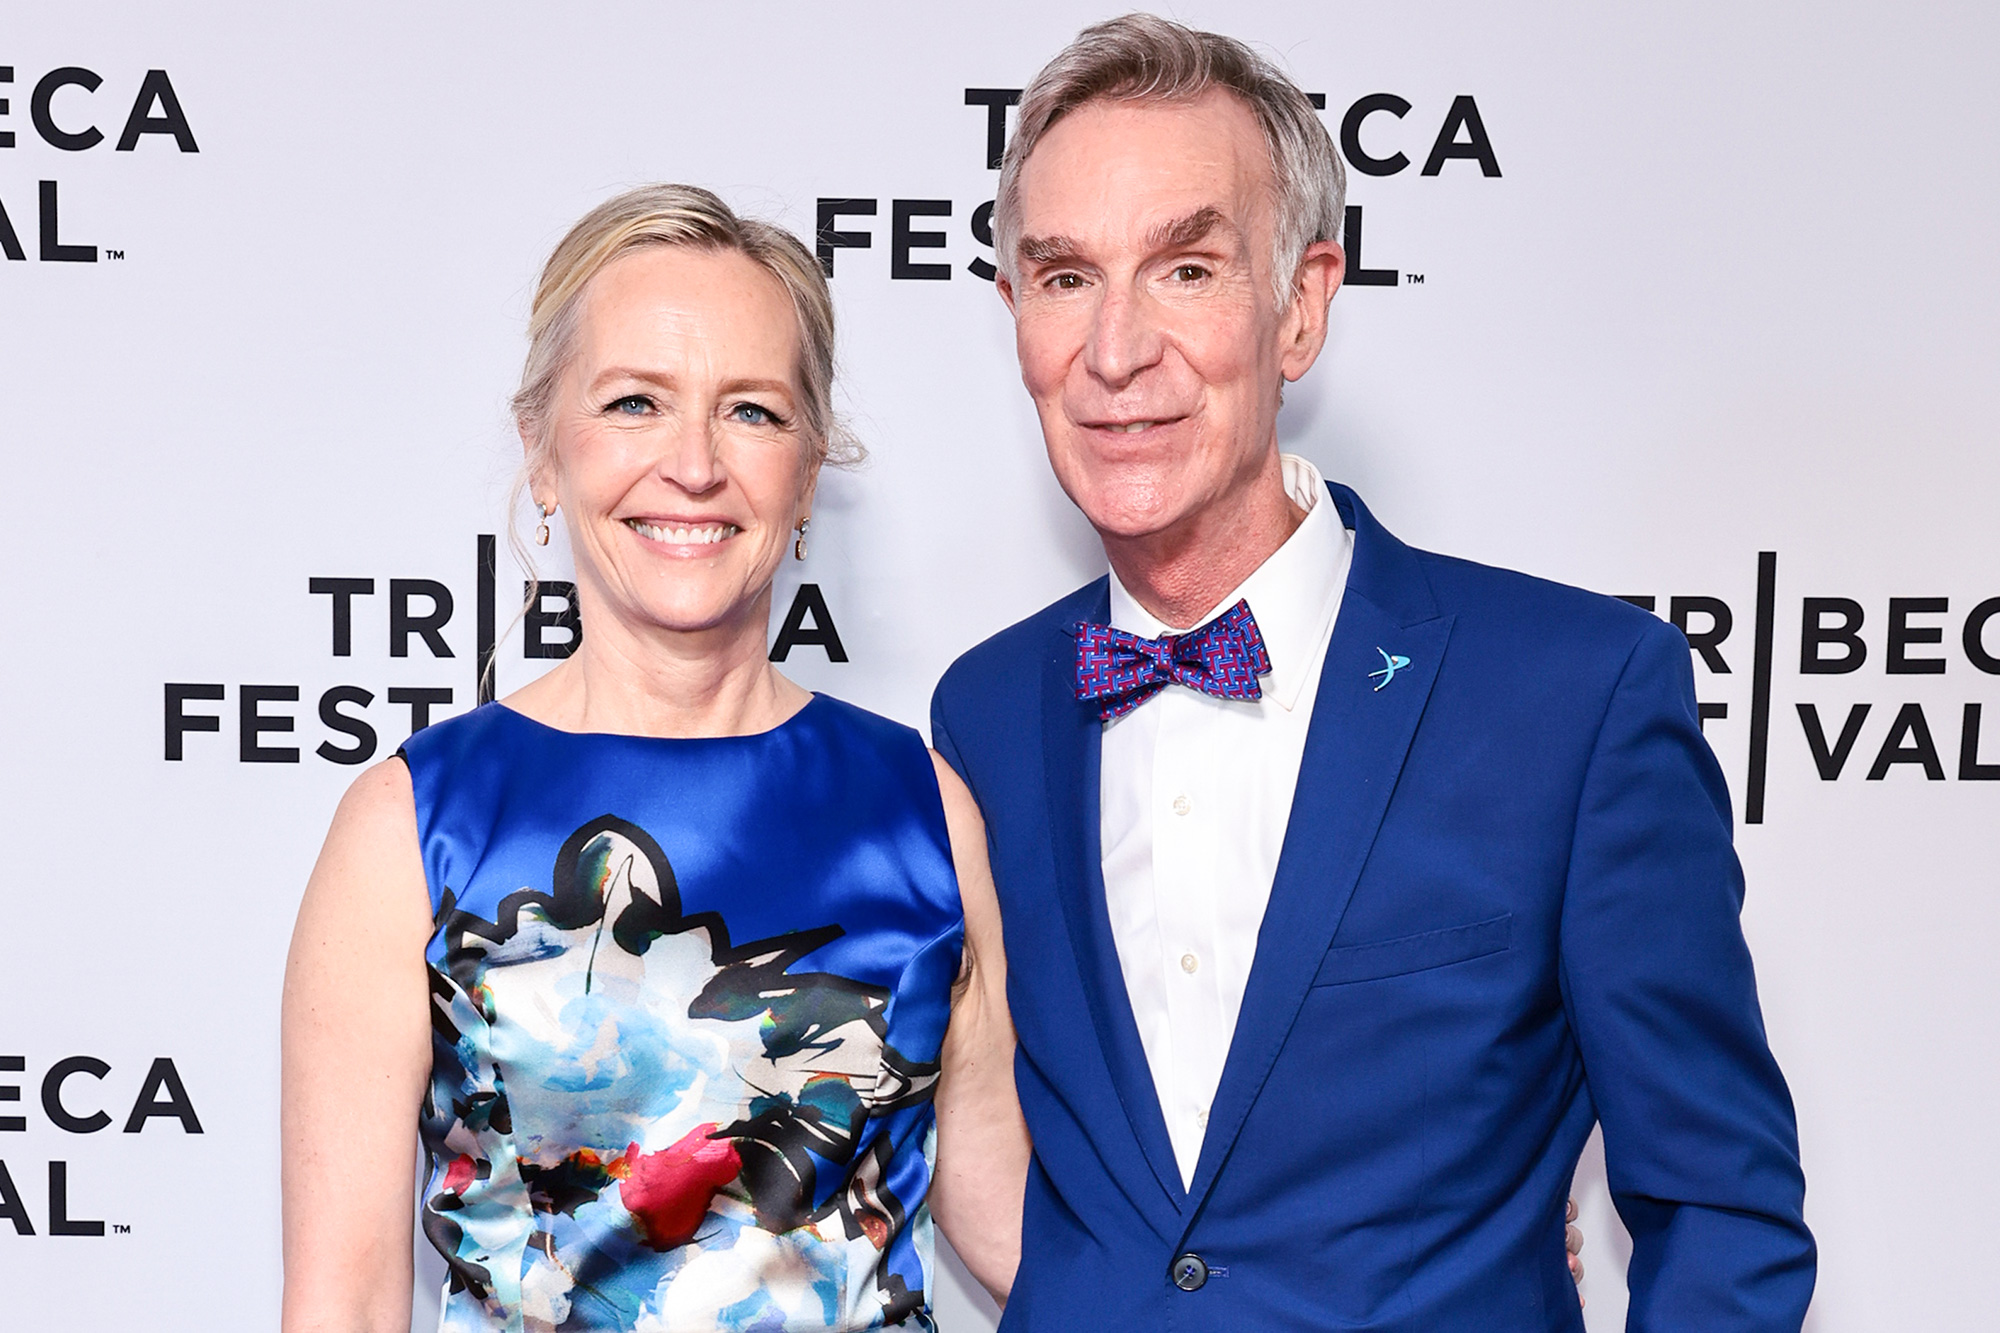 Bill Nye and Journalist and best-selling author Liza Mundy both smiling and wearing matching blue clothes